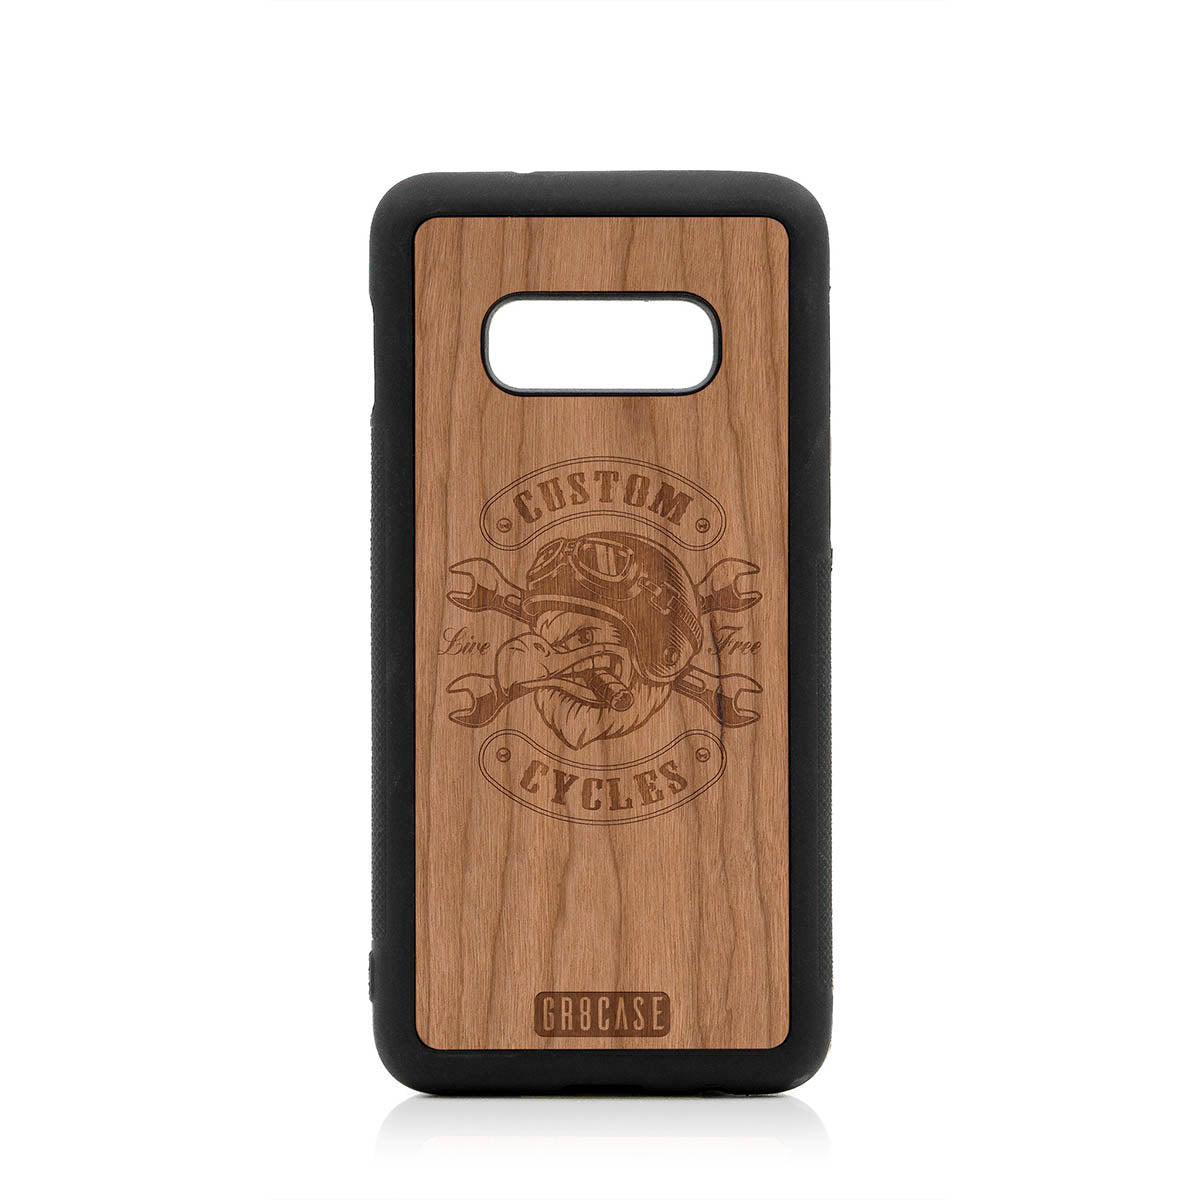 Custom Cycles Live Free (Biker Eagle) Design Wood Case For Samsung Galaxy S10E by GR8CASE